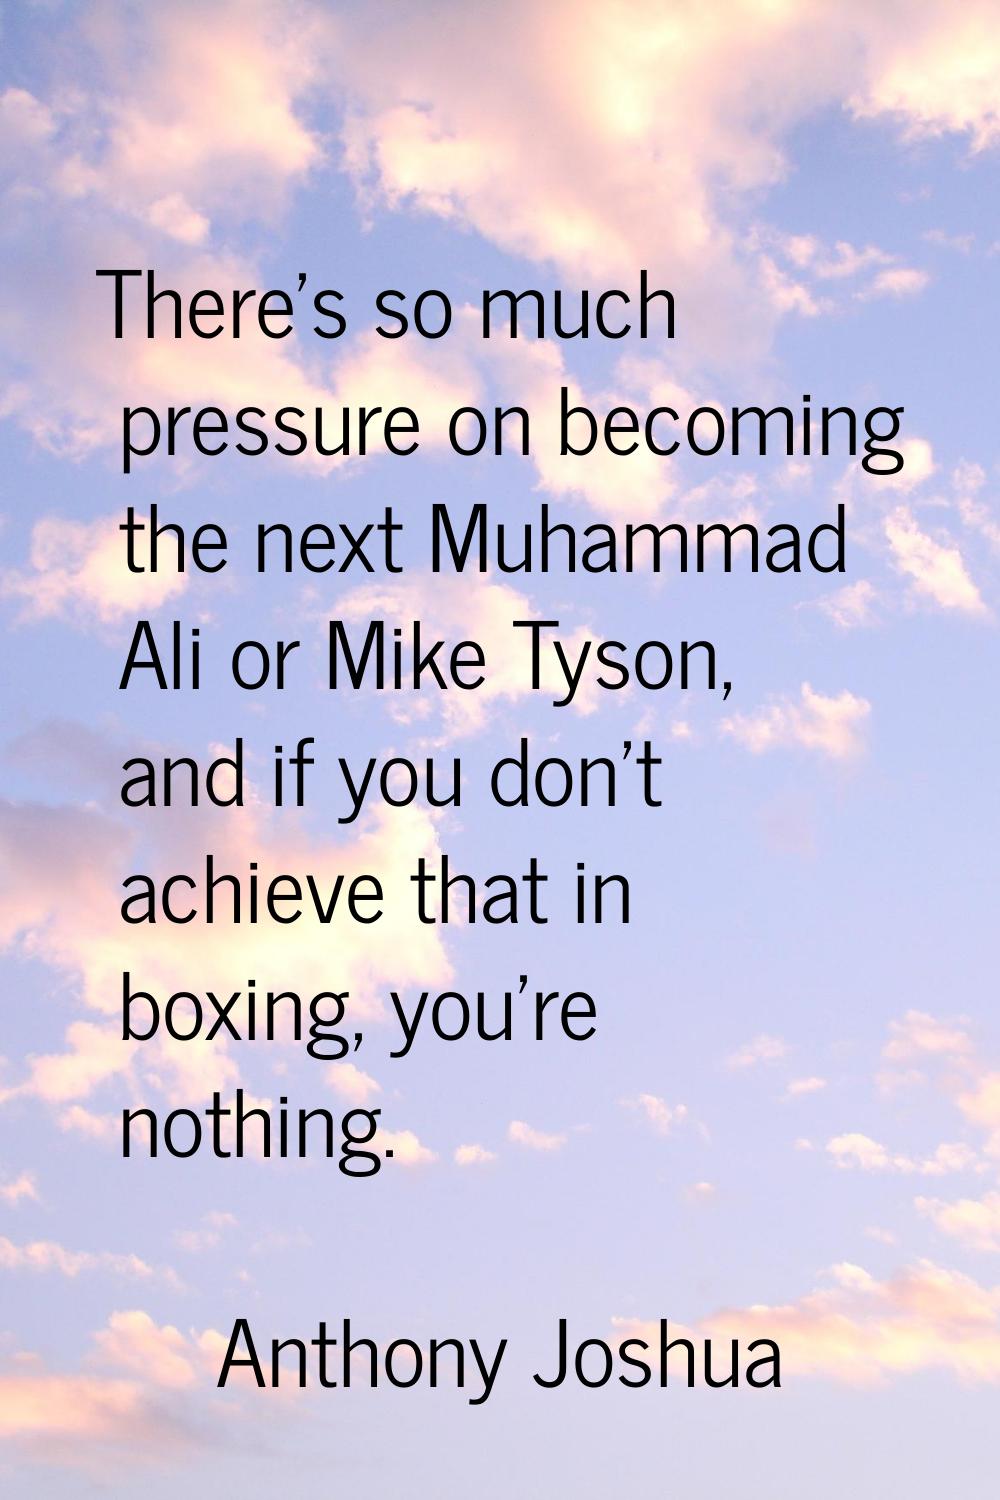 There's so much pressure on becoming the next Muhammad Ali or Mike Tyson, and if you don't achieve 